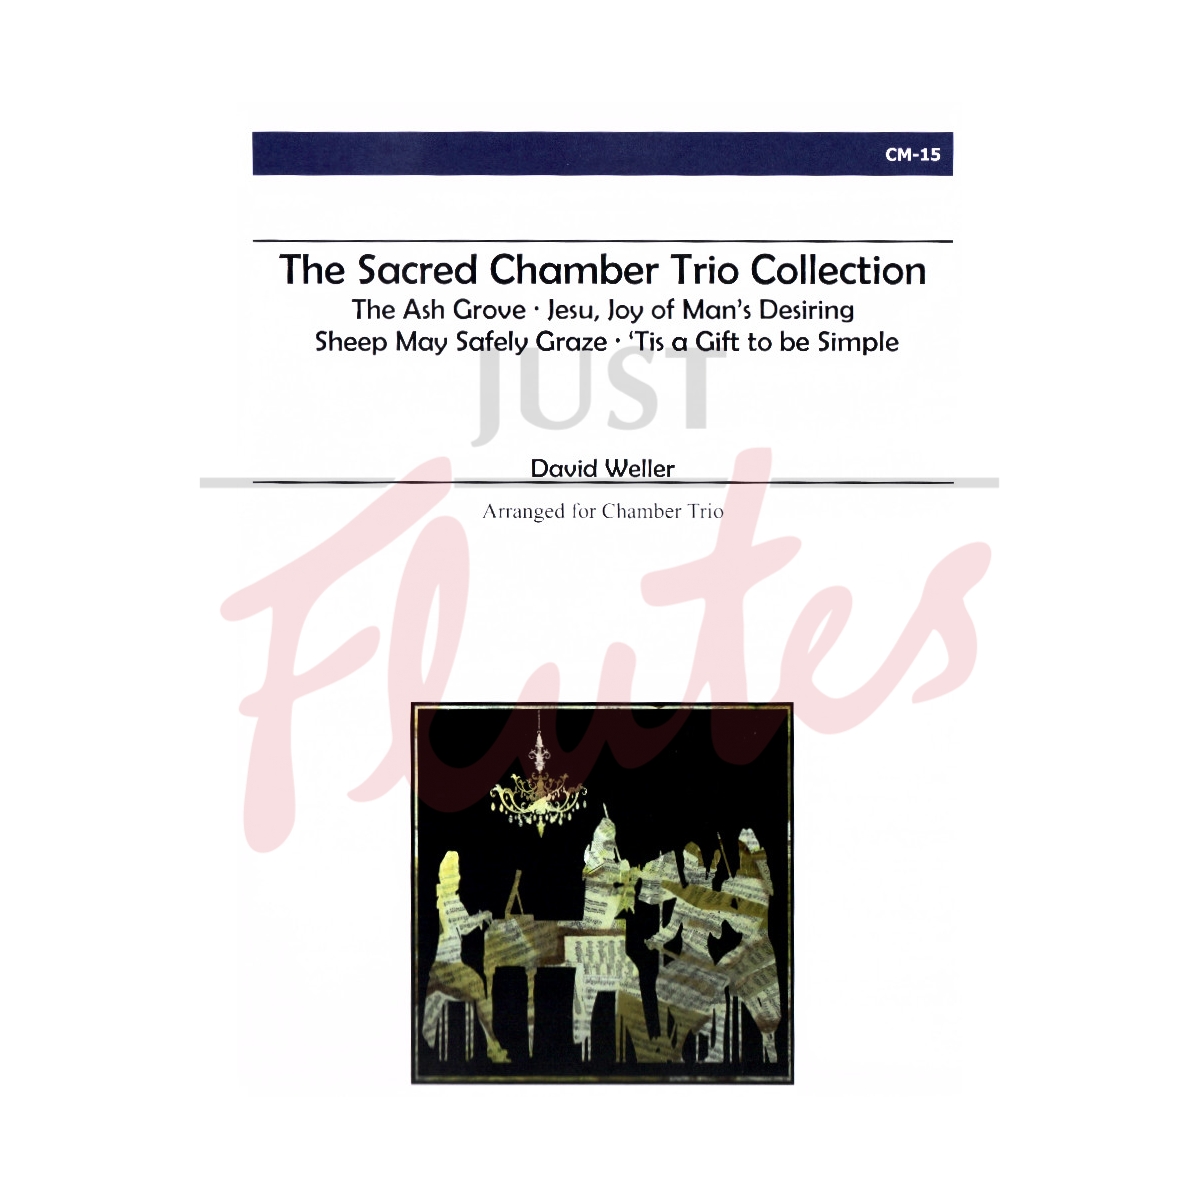 The Sacred Chamber Trio Collection